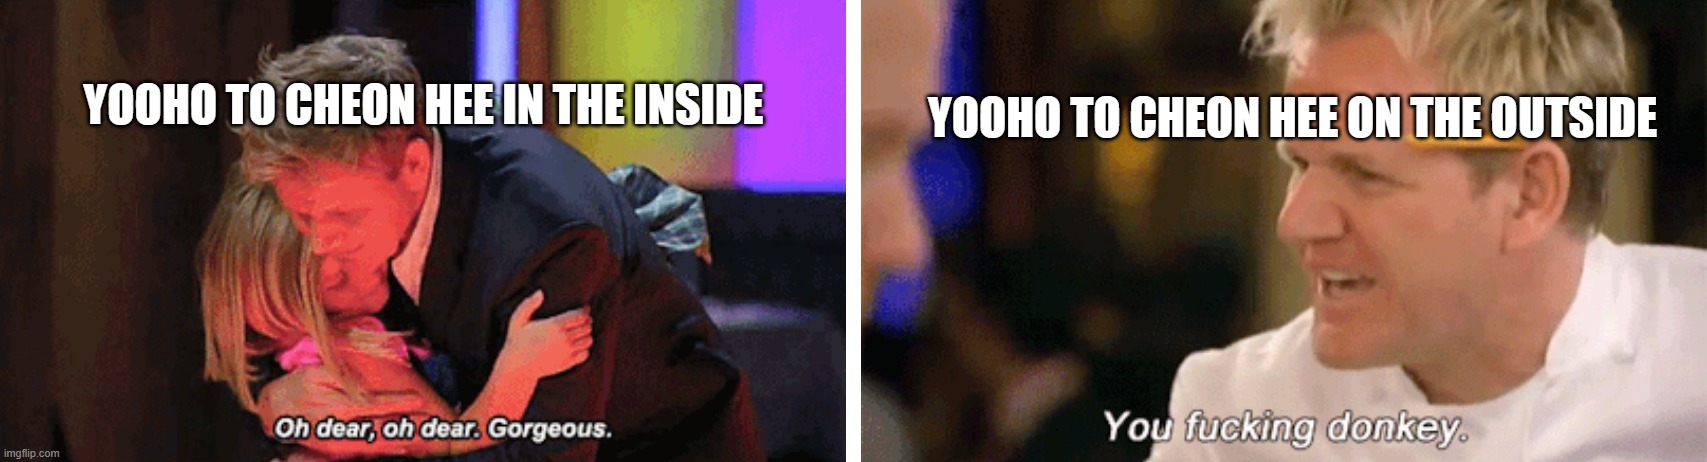 doctor's rebirth | YOOHO TO CHEON HEE ON THE OUTSIDE; YOOHO TO CHEON HEE IN THE INSIDE | image tagged in doctor's rebirth | made w/ Imgflip meme maker